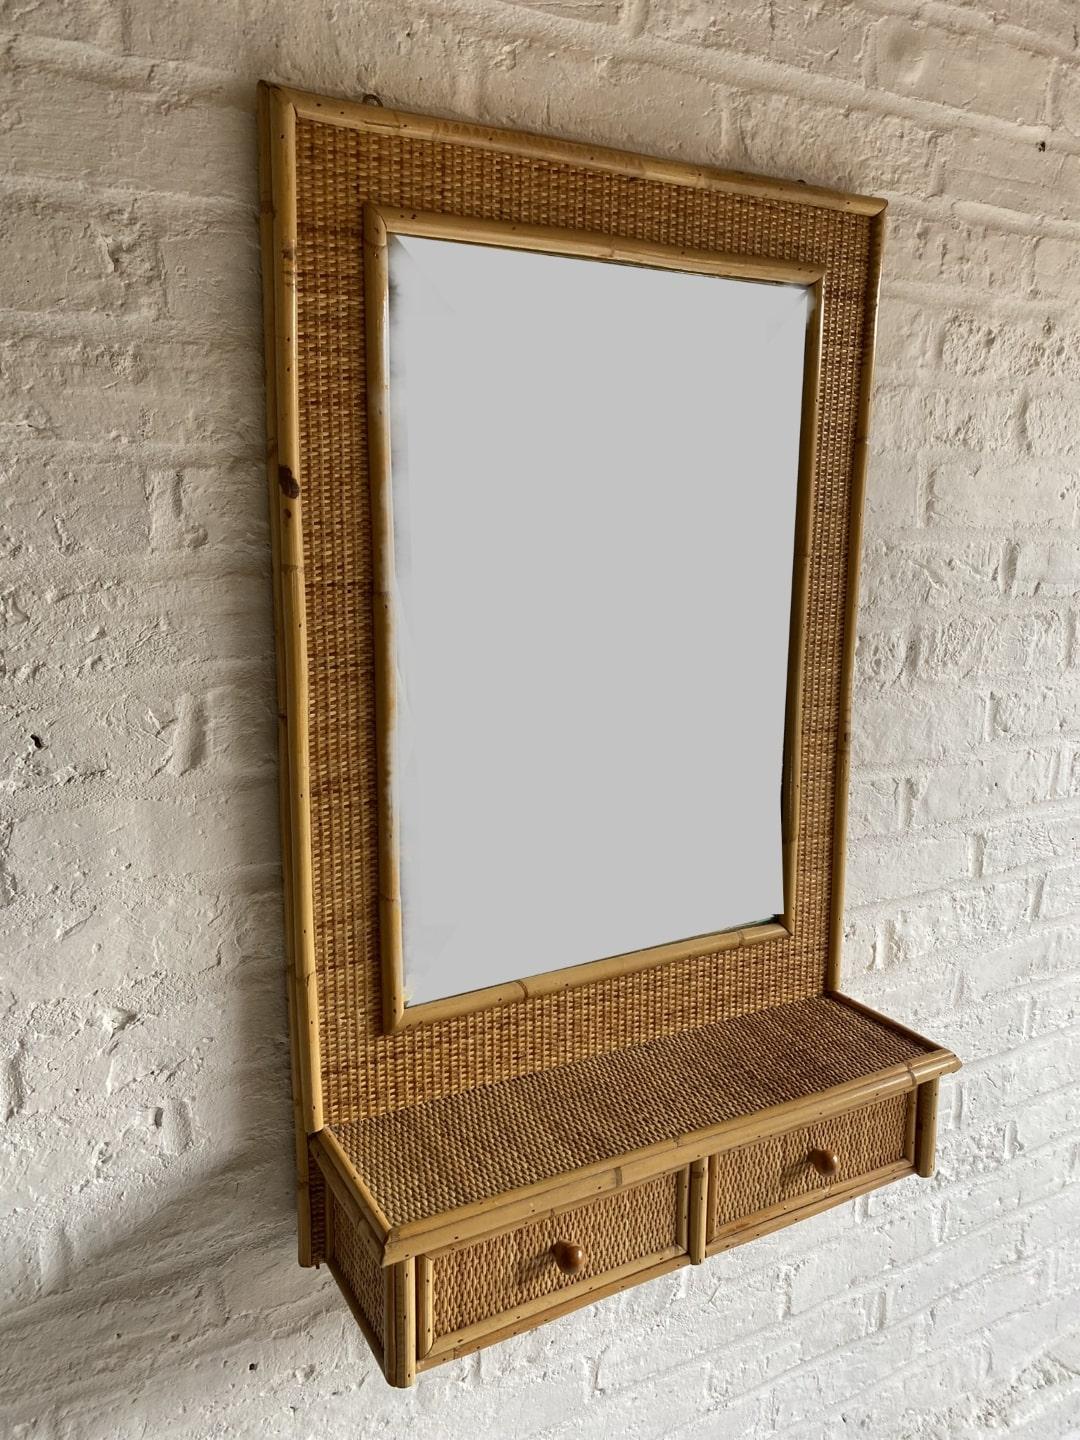 Mid Century Rattan & Cane Wall Mirror with Drawers, Italian, 1970s For Sale 2